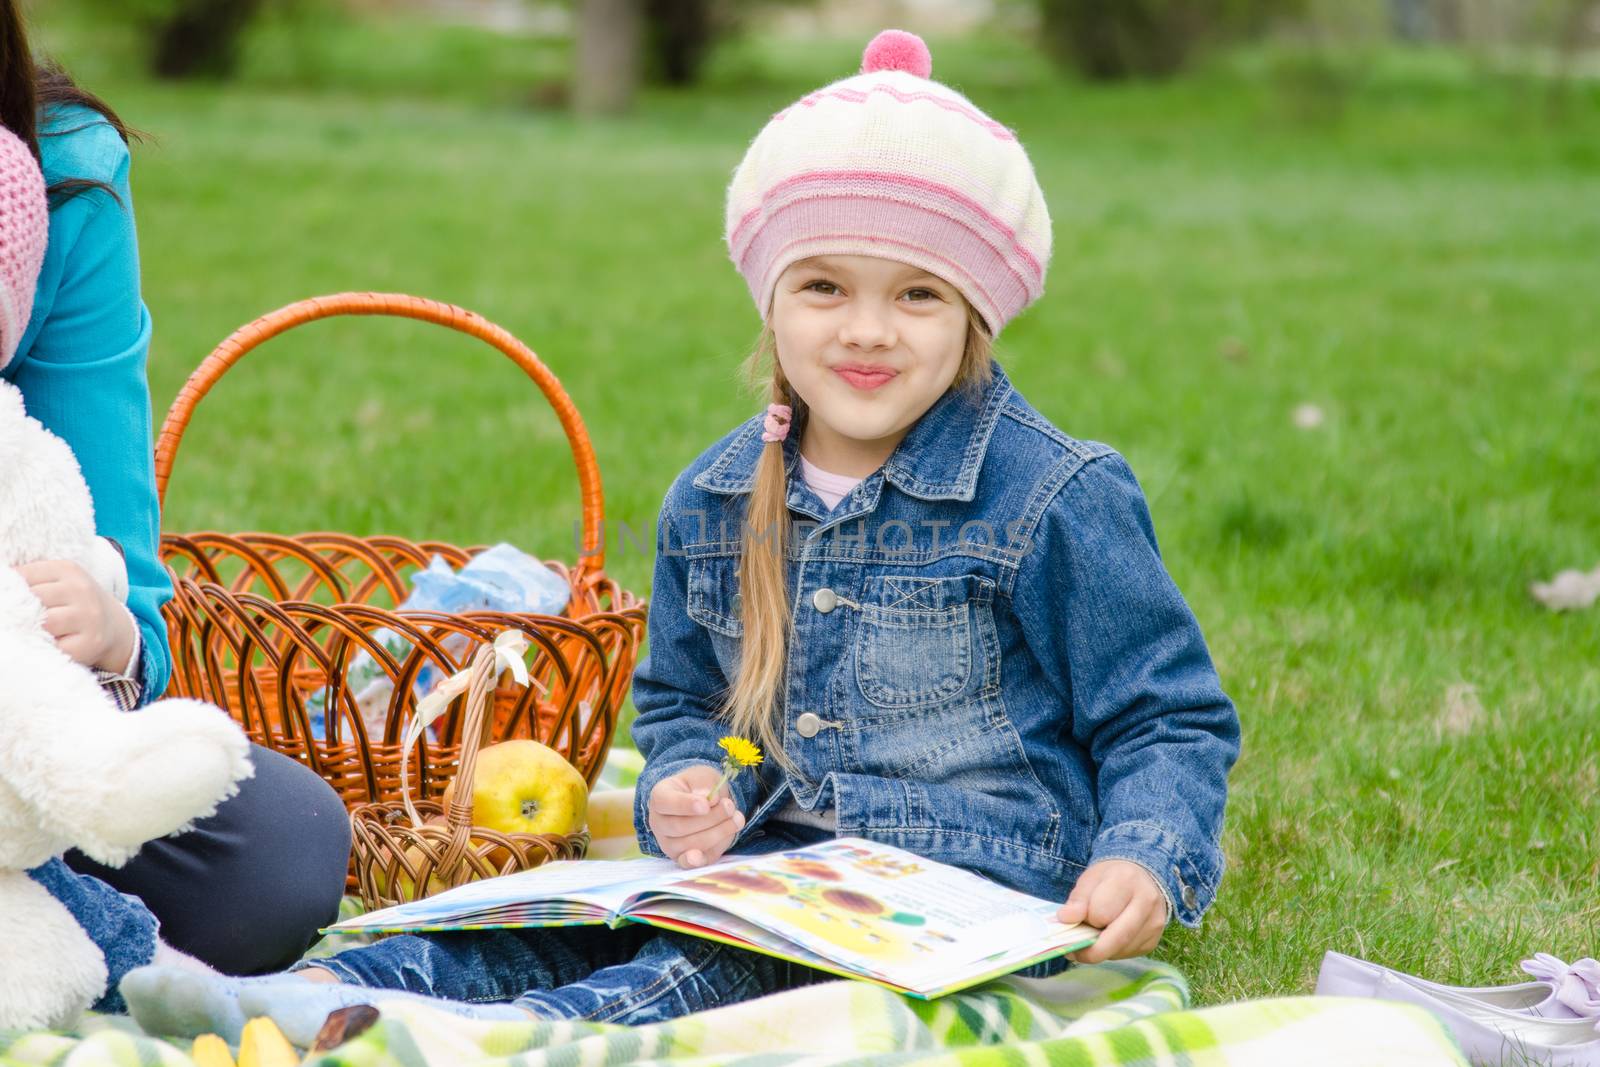 A girl of five years in a denim jacket on a green lawn at a picnic with a book in their hands